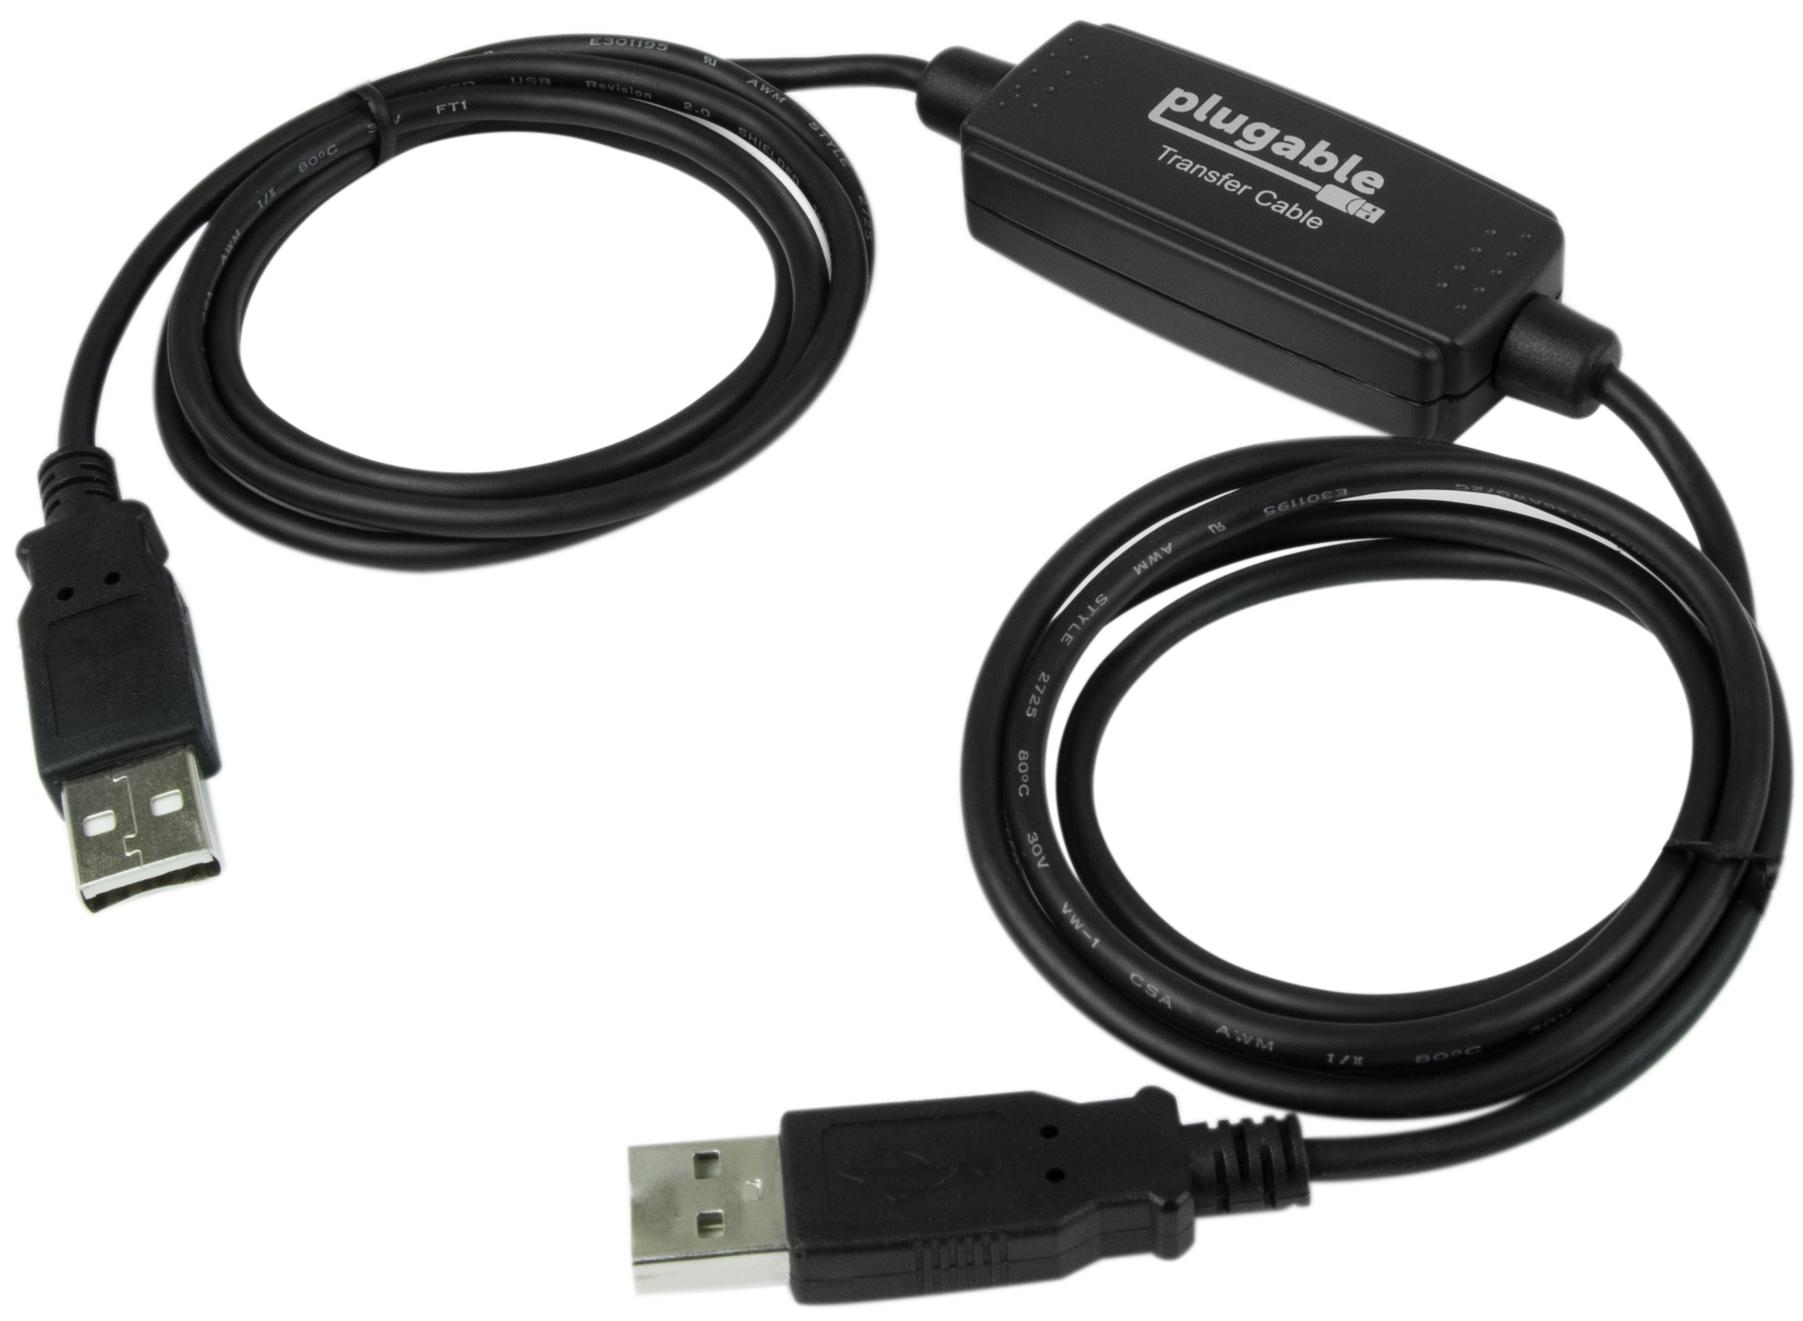 Plugable USB Transfer Cable, Unlimited Use, Transfer Data Between 2 Windows PC's, Compatible with Windows 11, 10, 7, XP, Bravura Easy Computer Sync Software Included - image 1 of 5